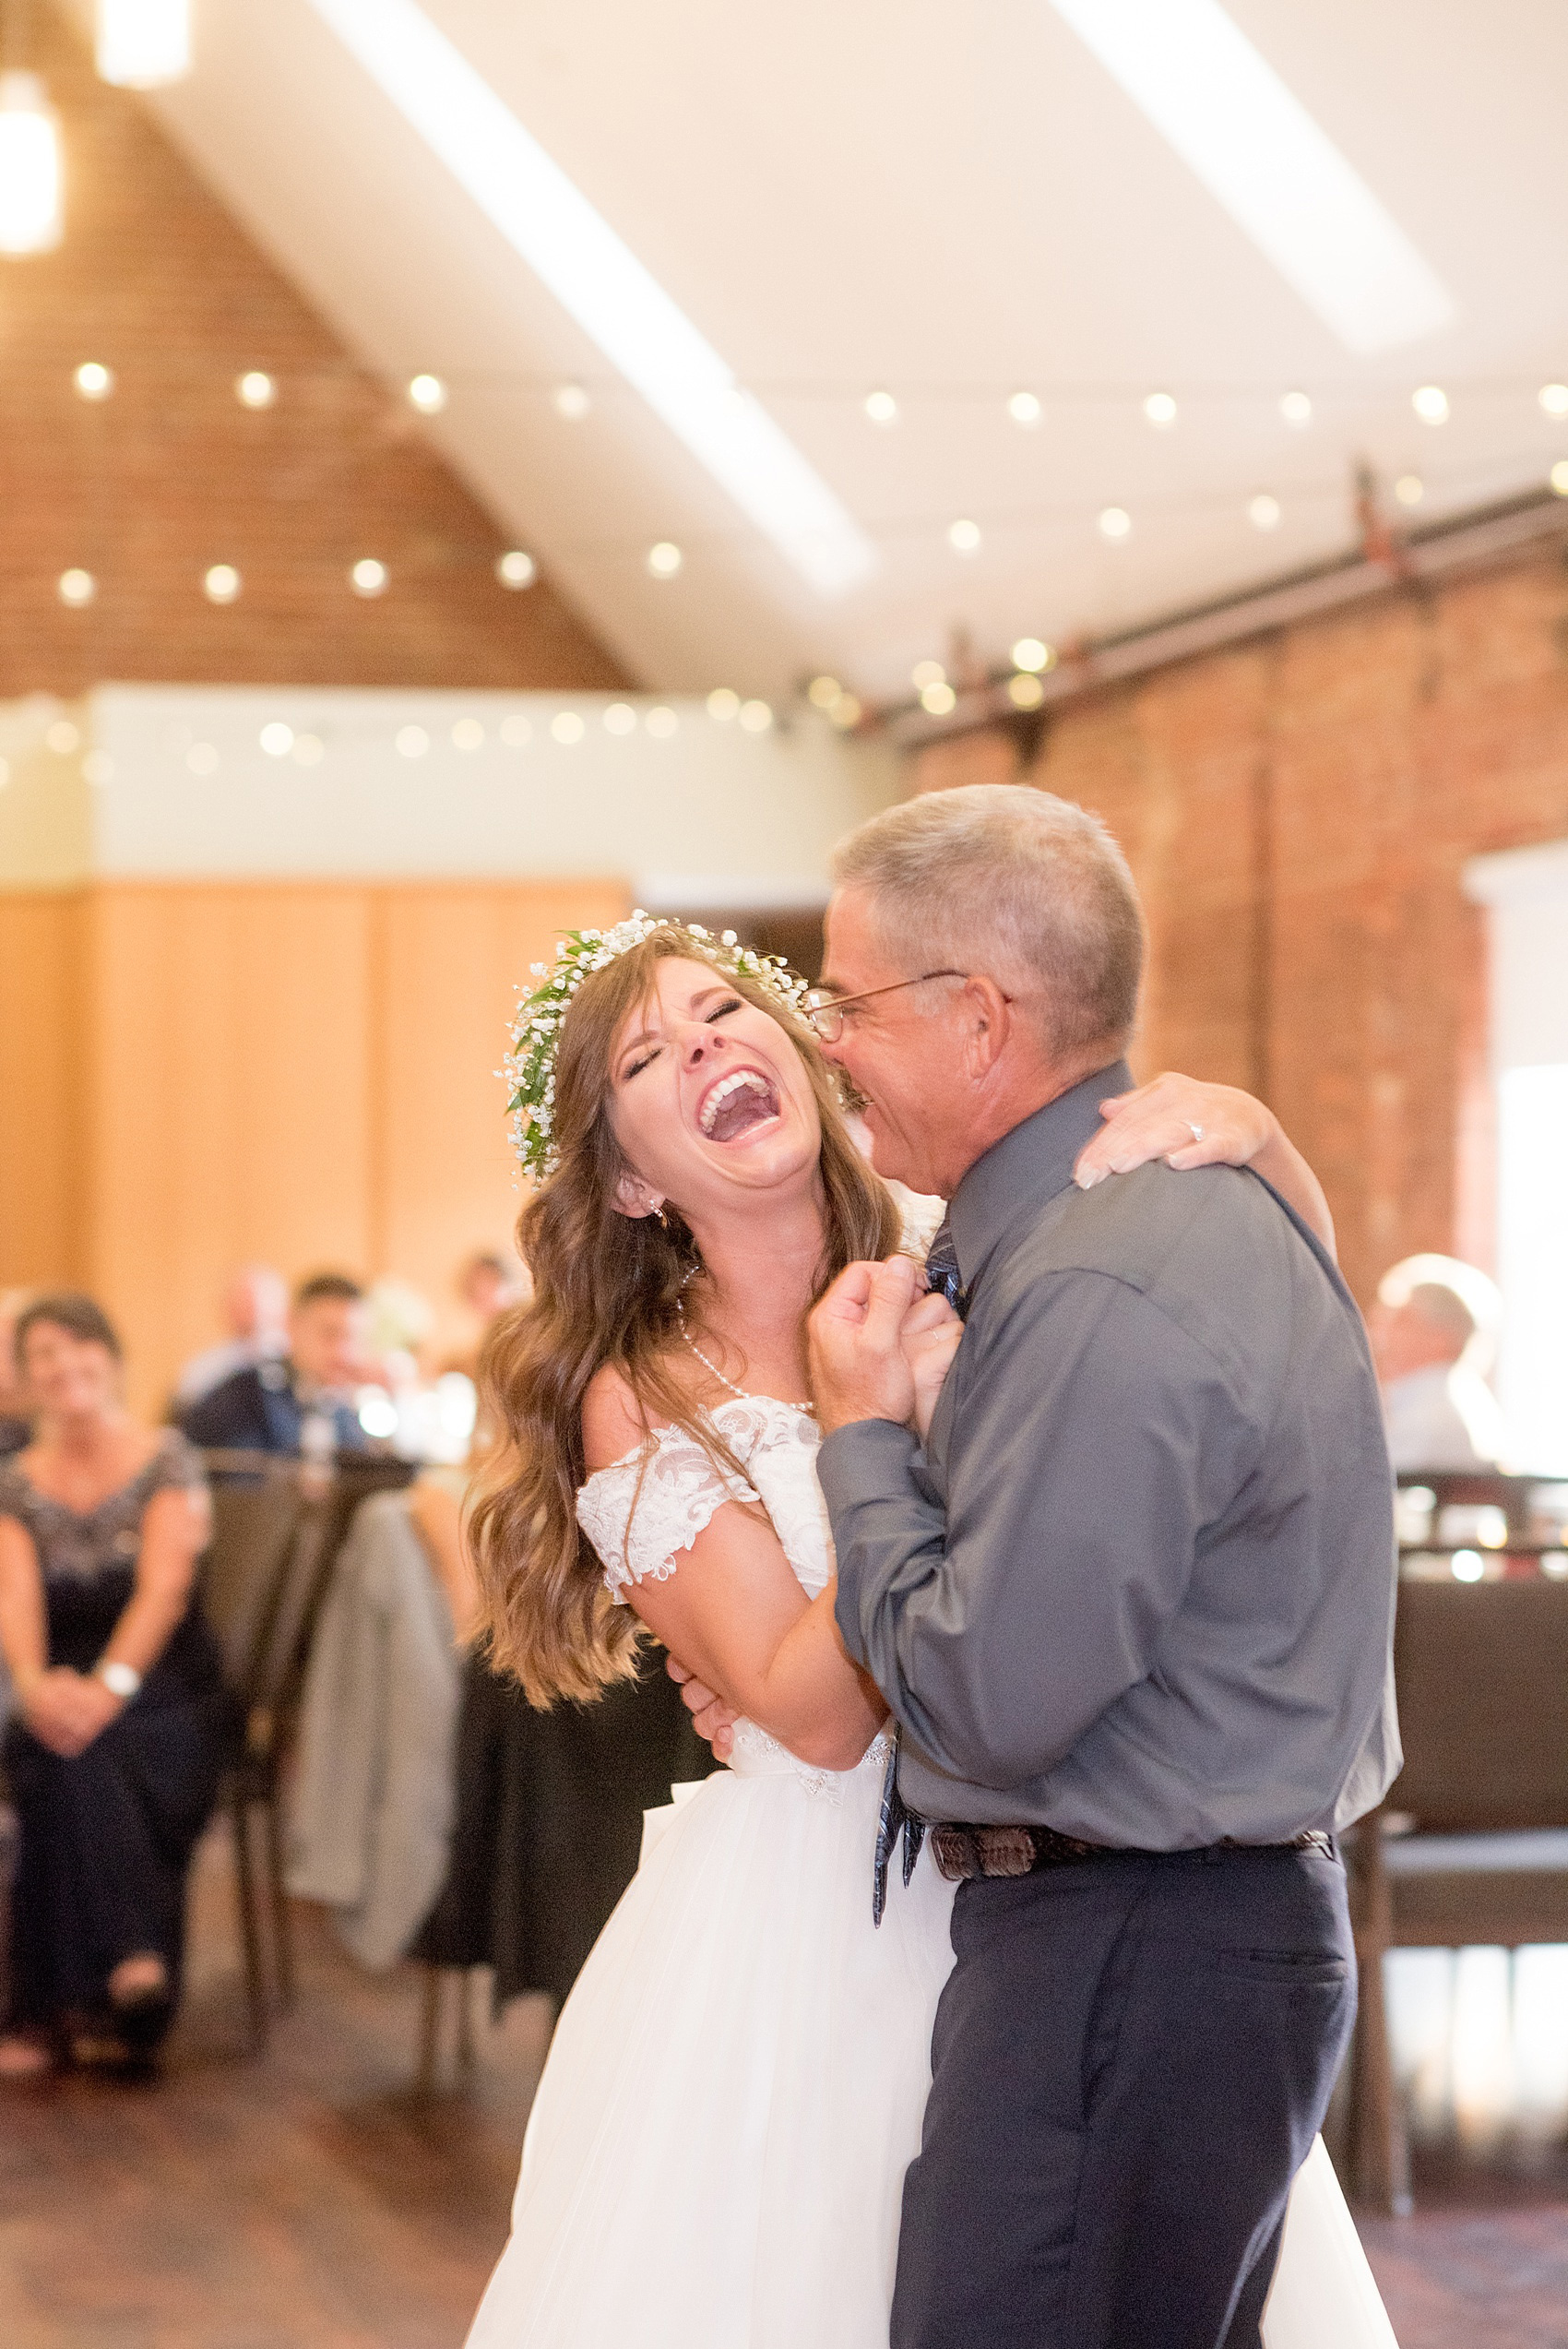 Mikkel Paige Photography photo of a Top of the Hill reception in Chapel Hill, NC. The bride shares a joyful dance with her father to "My Girl."